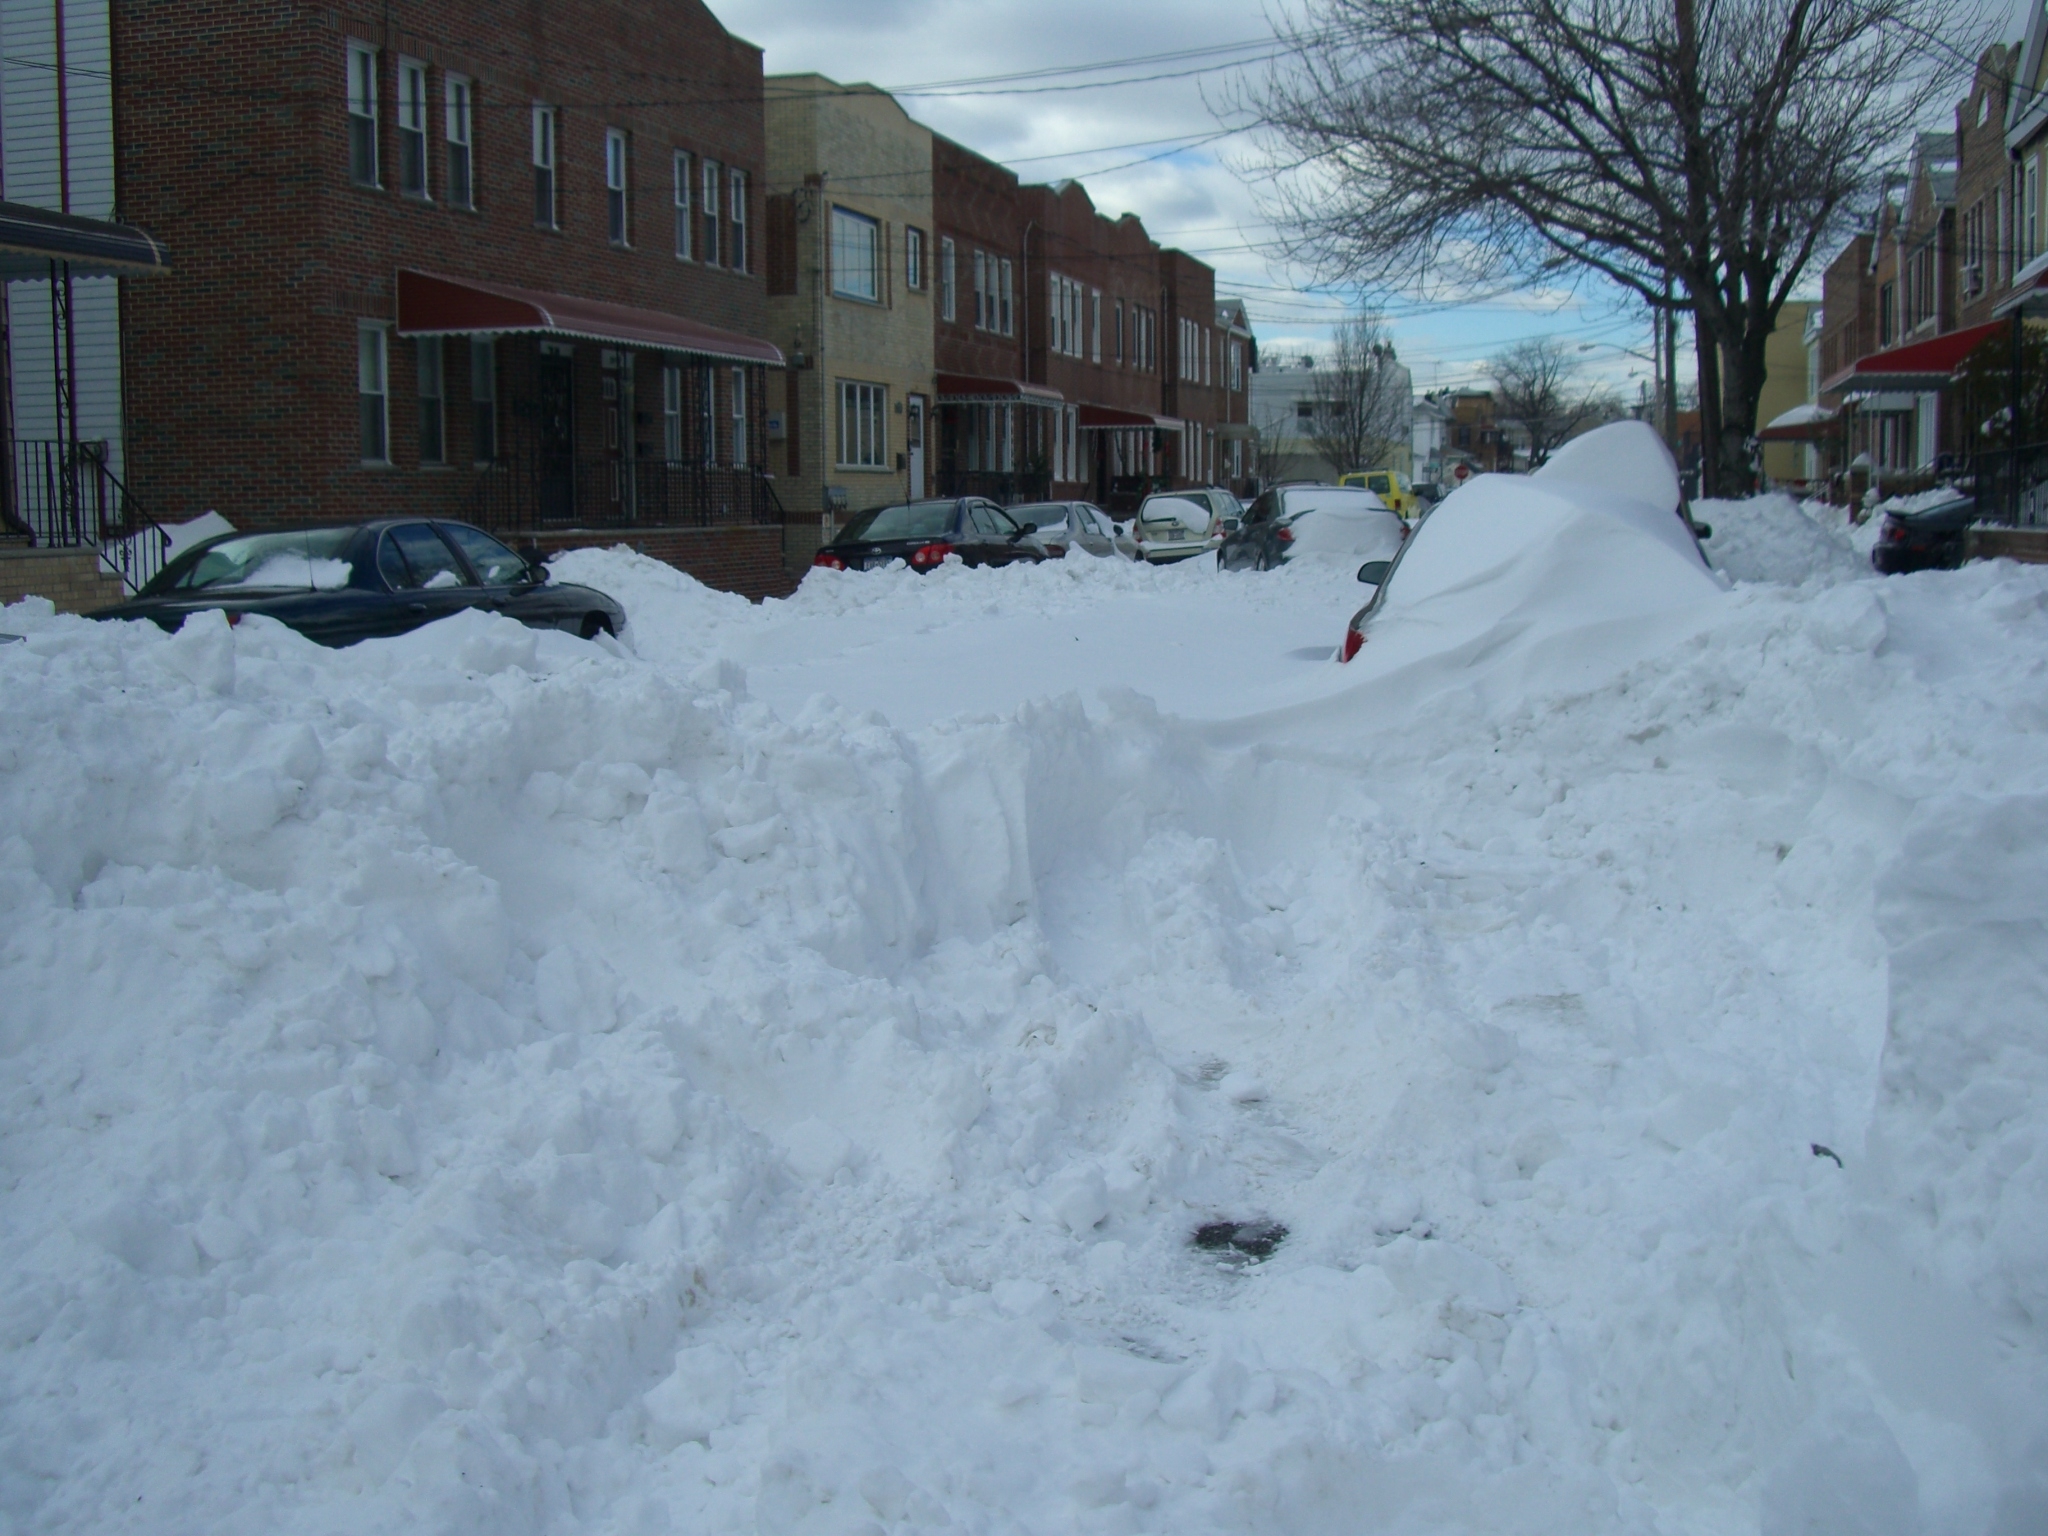 snow-this-is-69th-avenue-in-middle-village-queens.jpg 